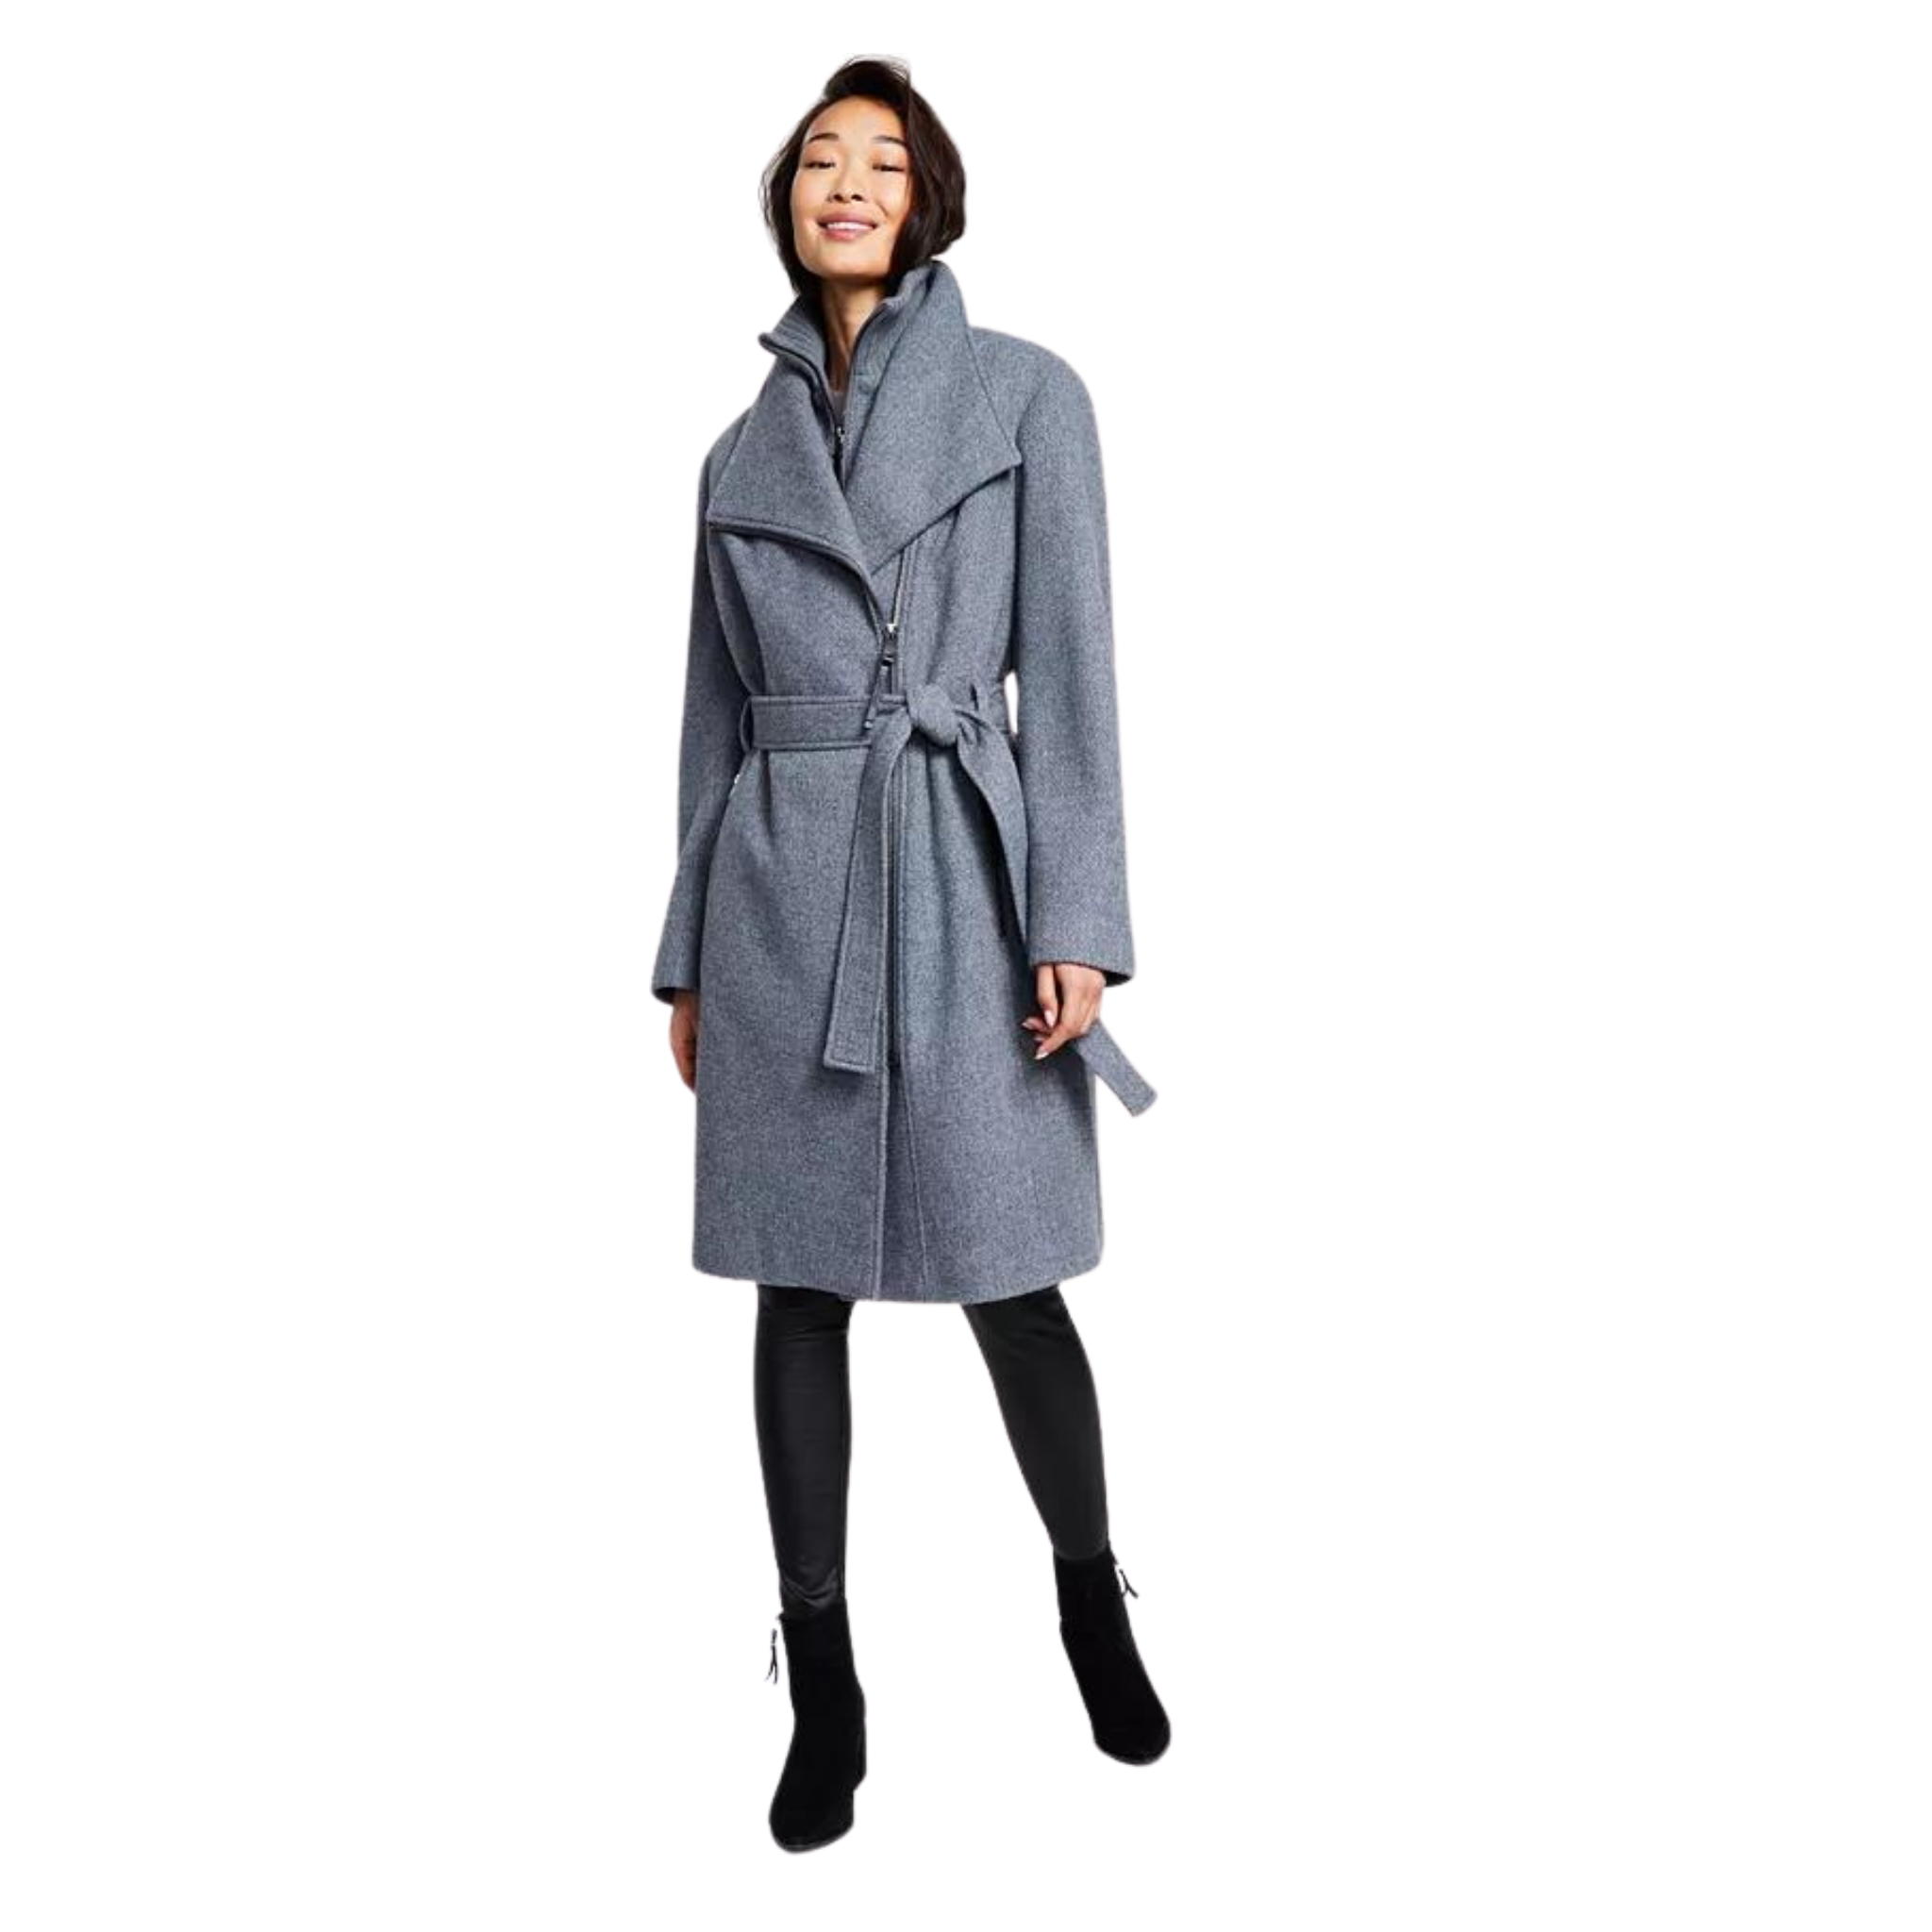 40-60% Off Women's Coats, Dresses, Cashmere Sweaters, And More